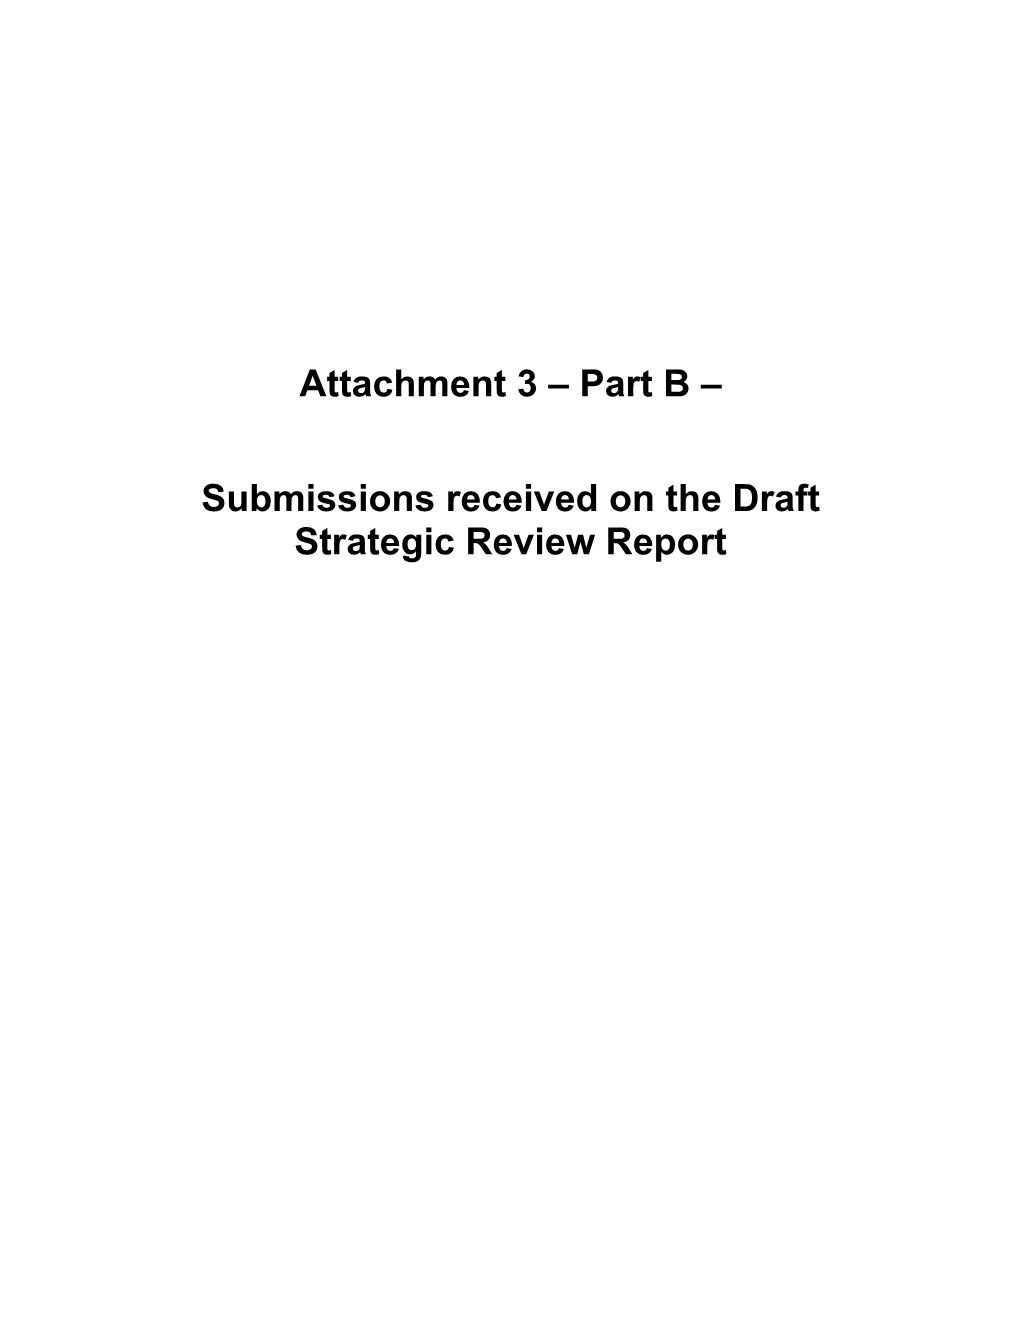 Submissions Received on the Draft Strategic Review Report